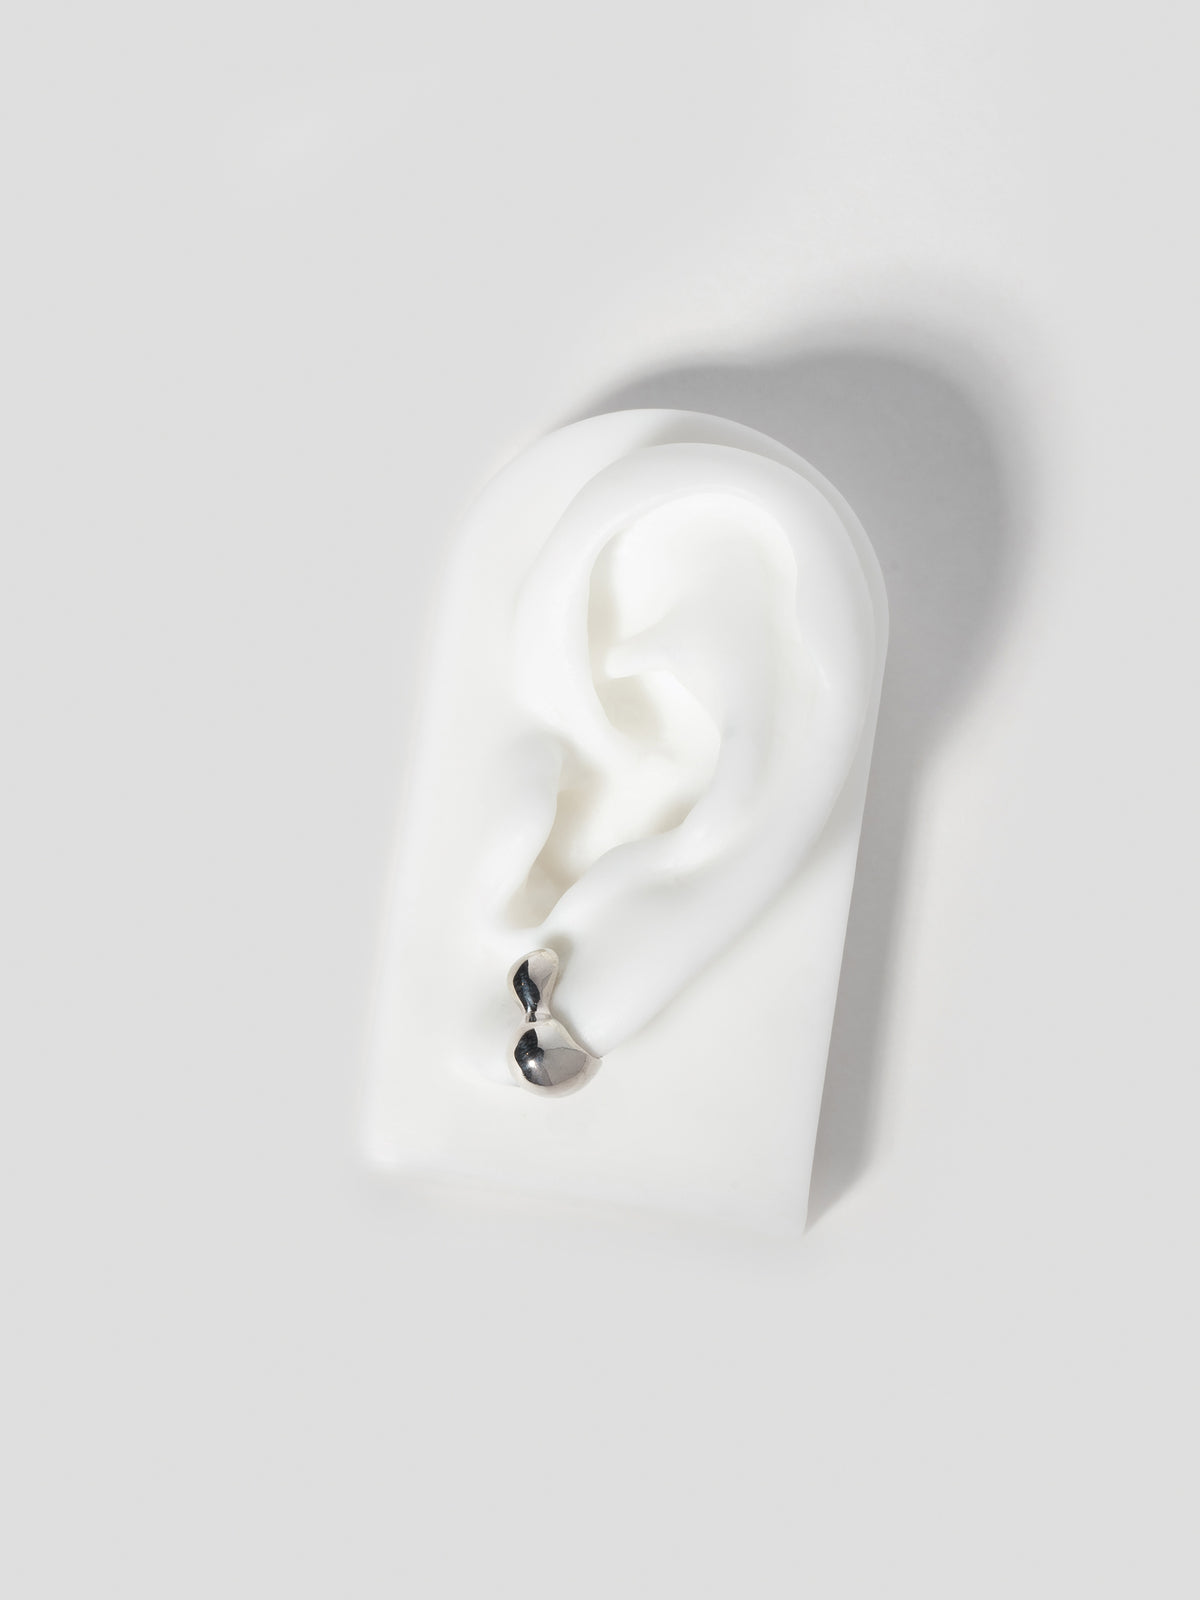 Product image of FARIS CHAMELLE Stud in Sterling Silver, shown on white silicone ear display.